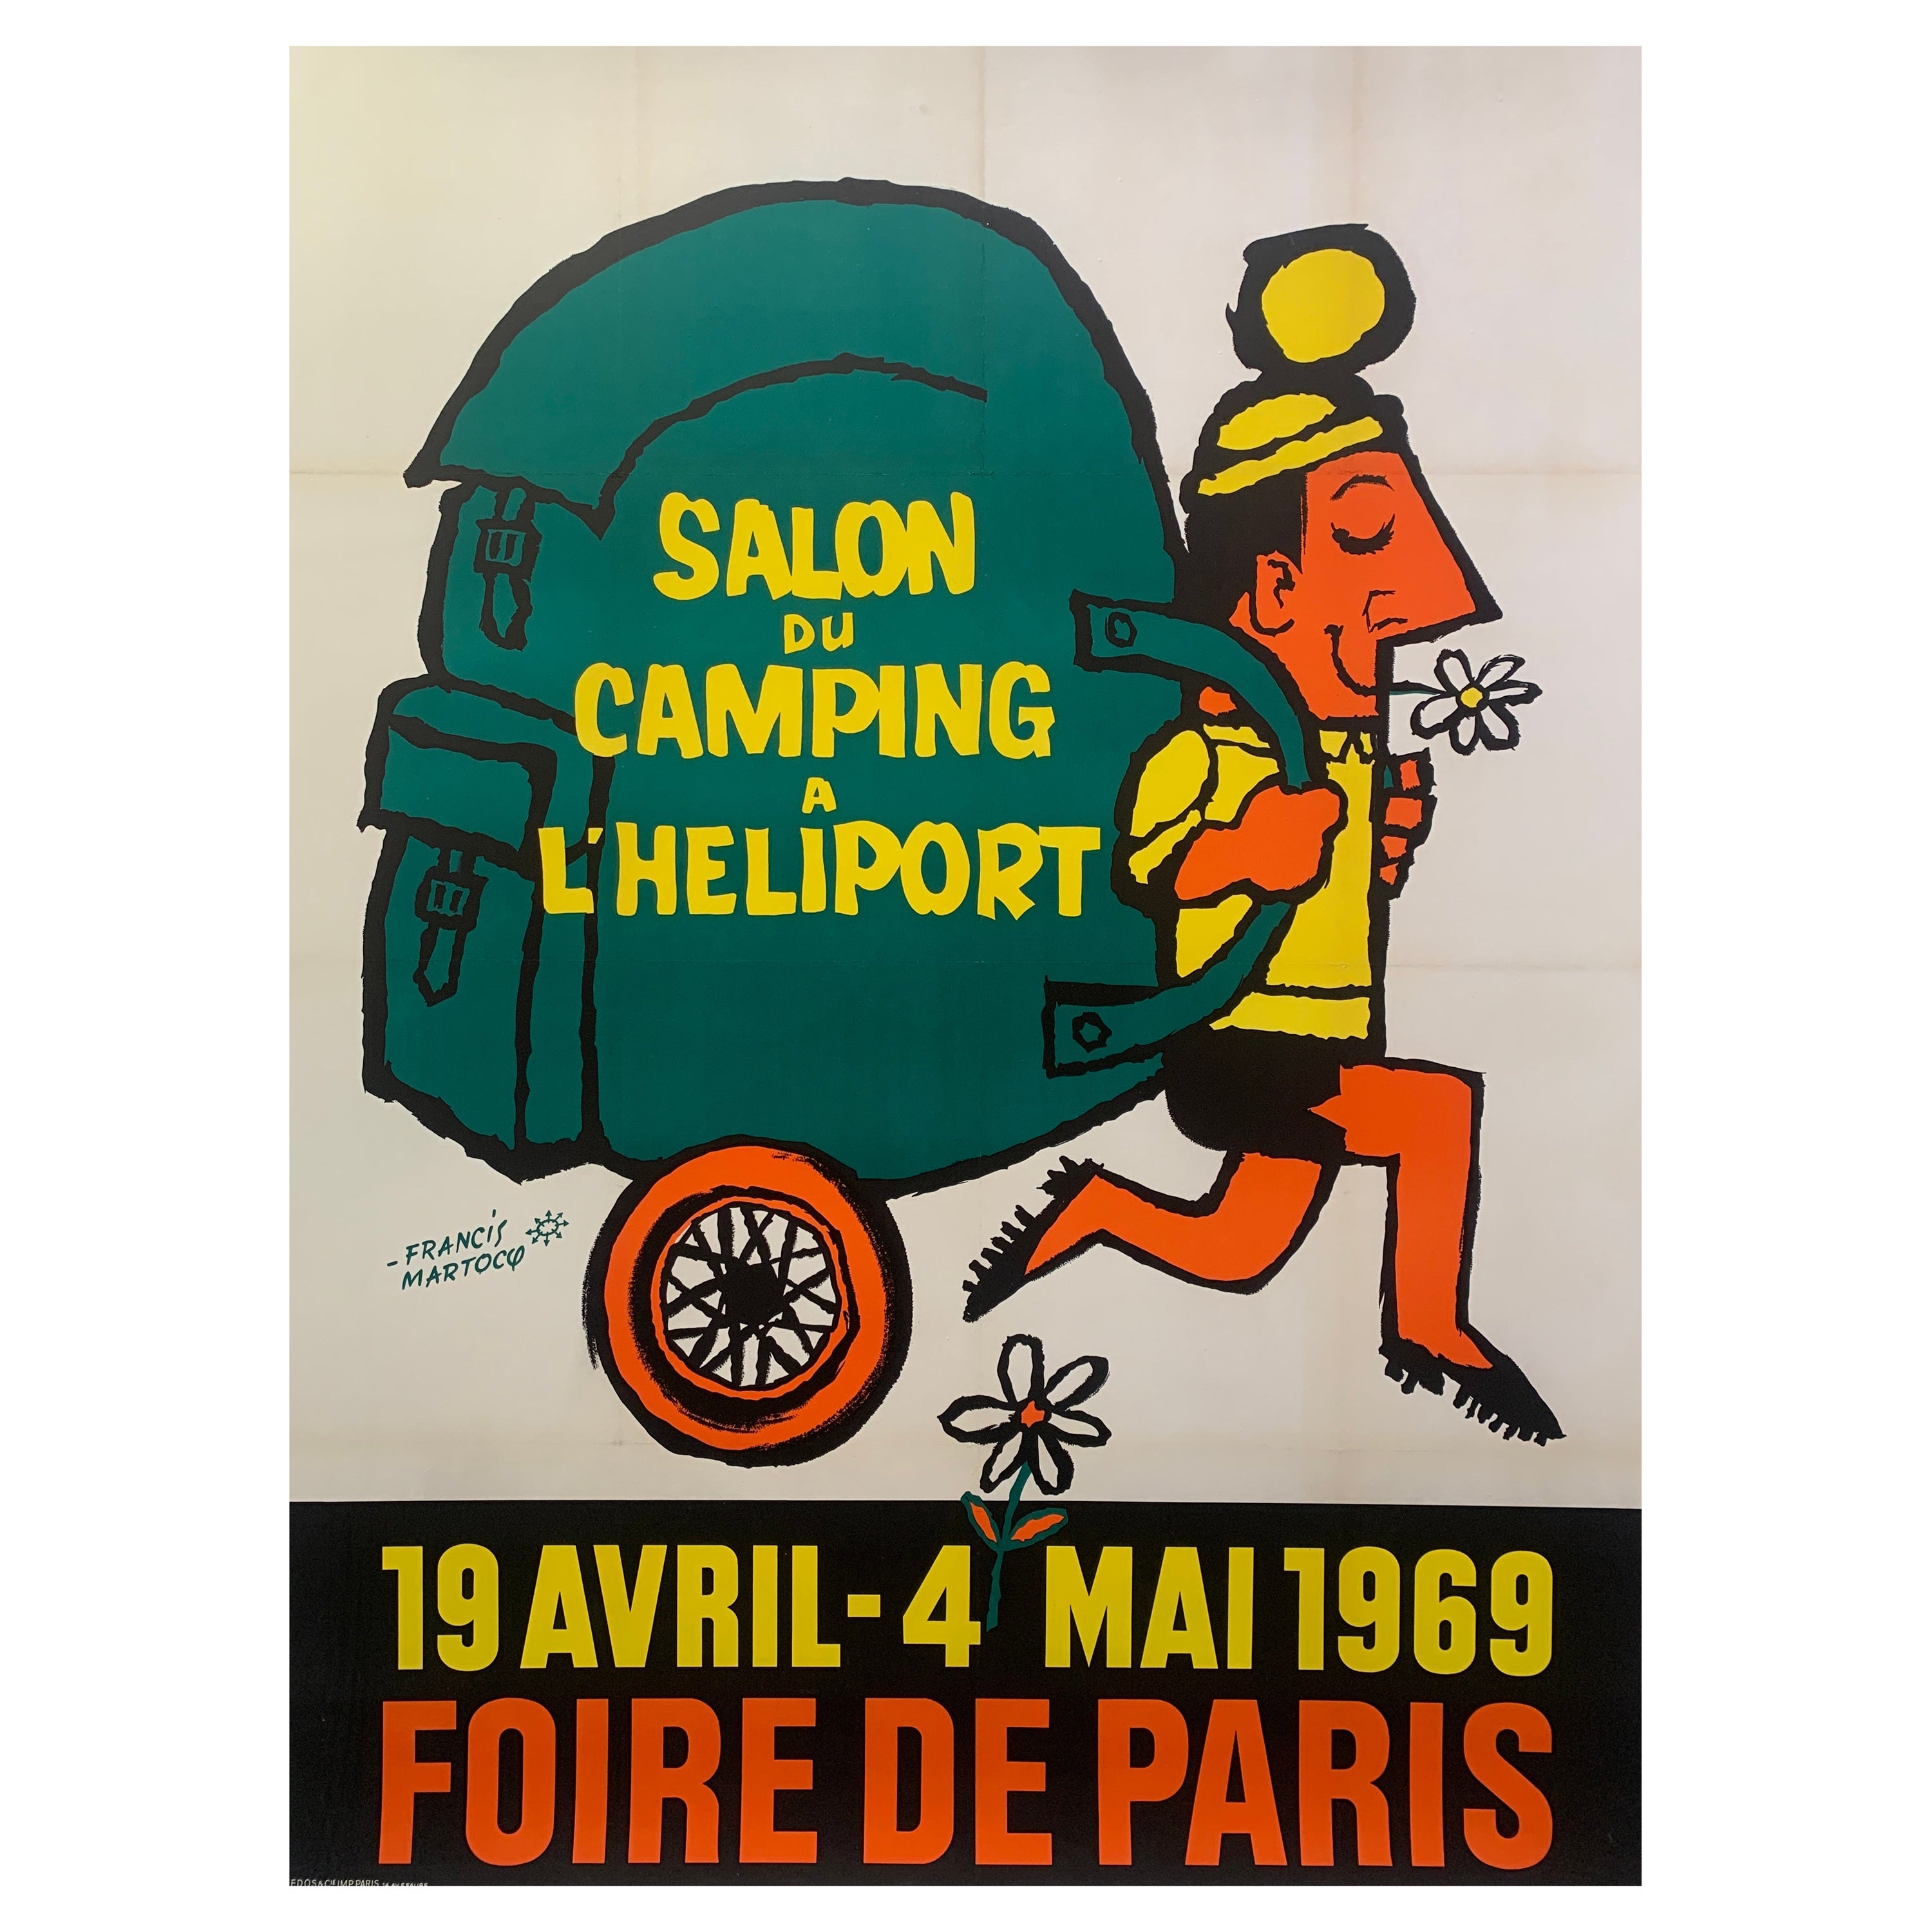 Original Vintage French Camping Poster, c. 1950 by Francis Martocq